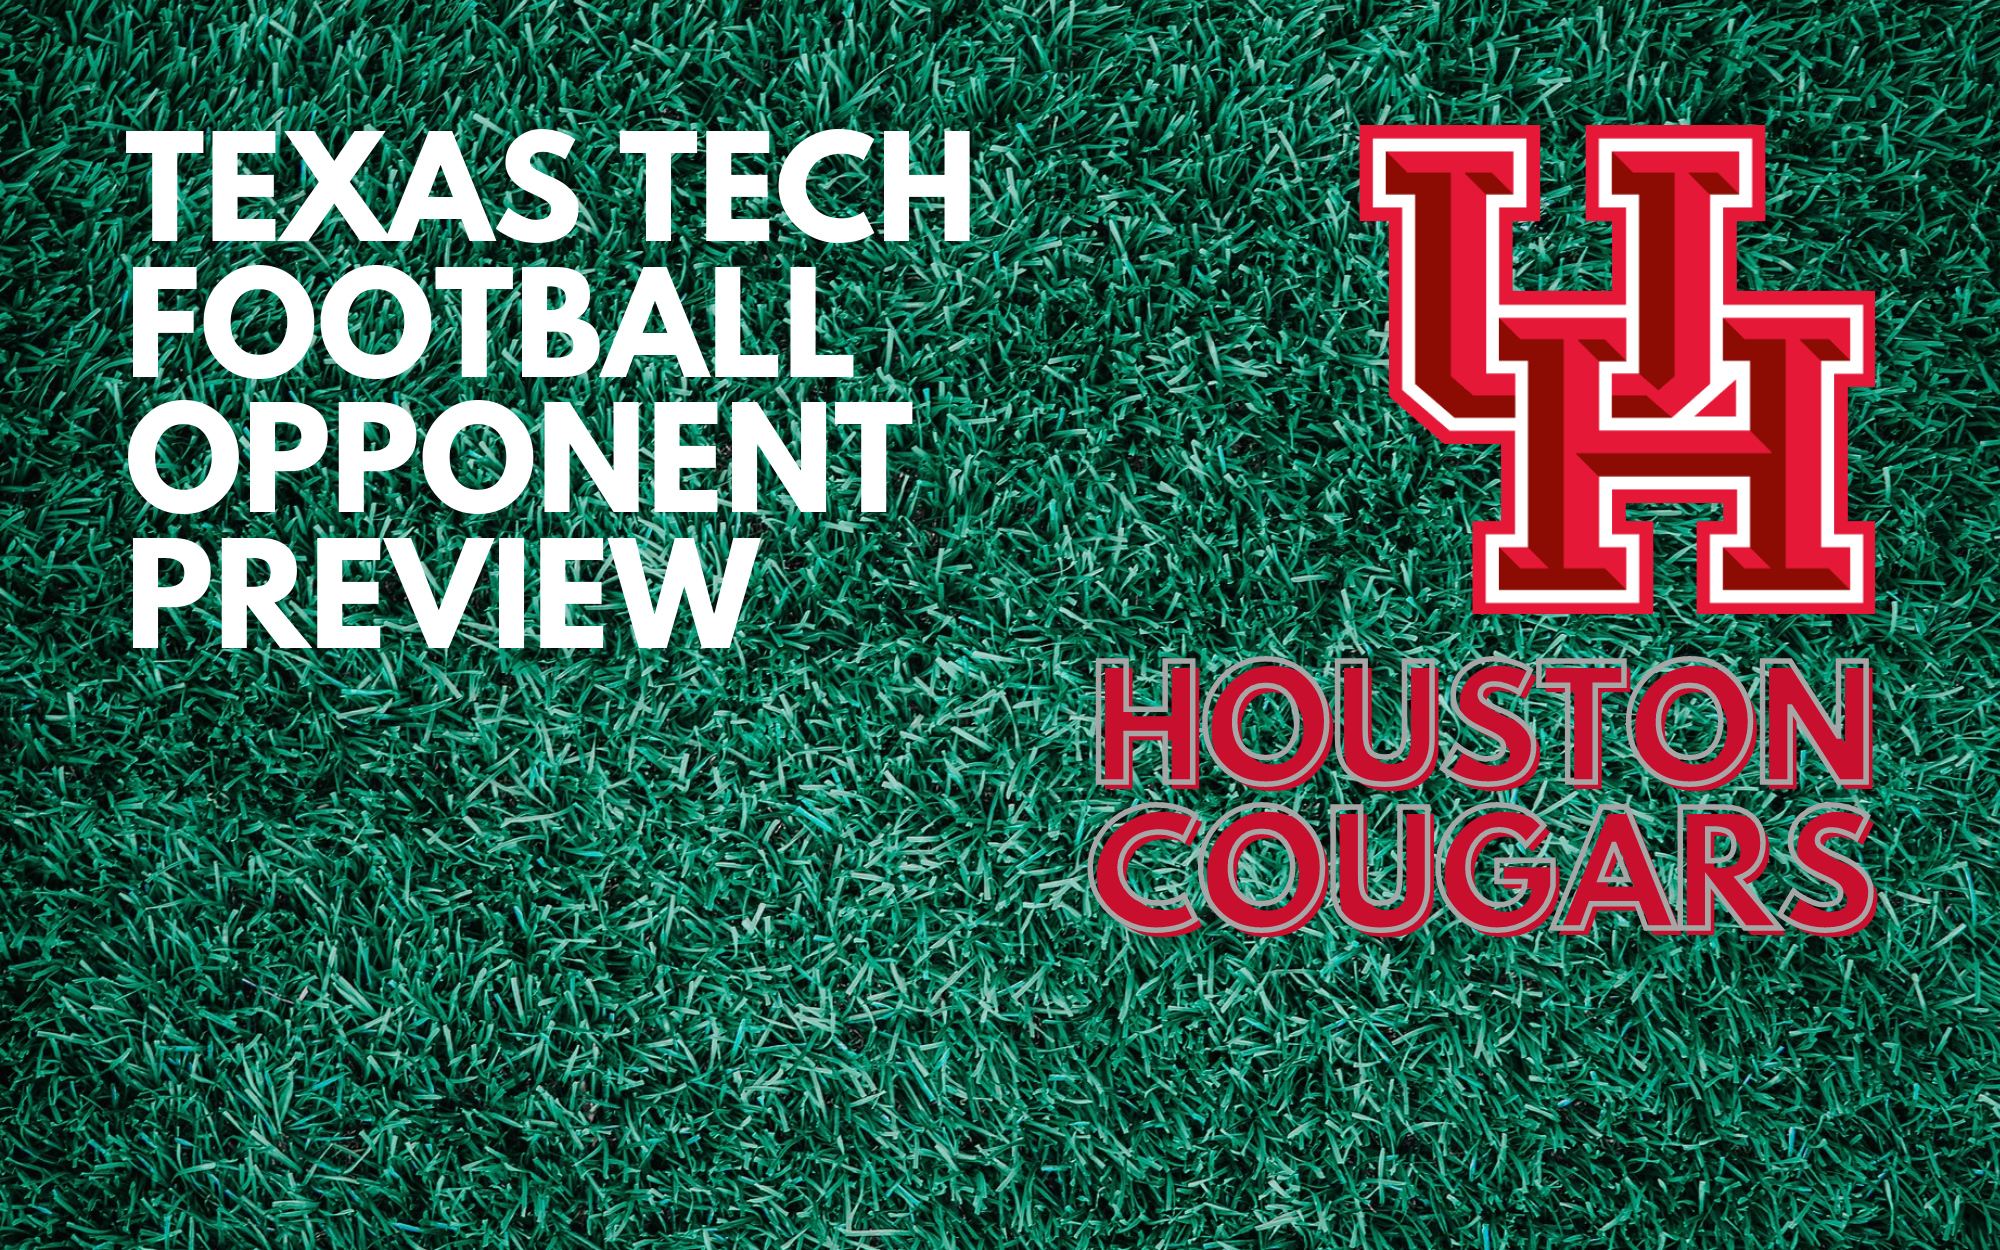 Texas Tech Football Opponent Preview: Houston Cougars